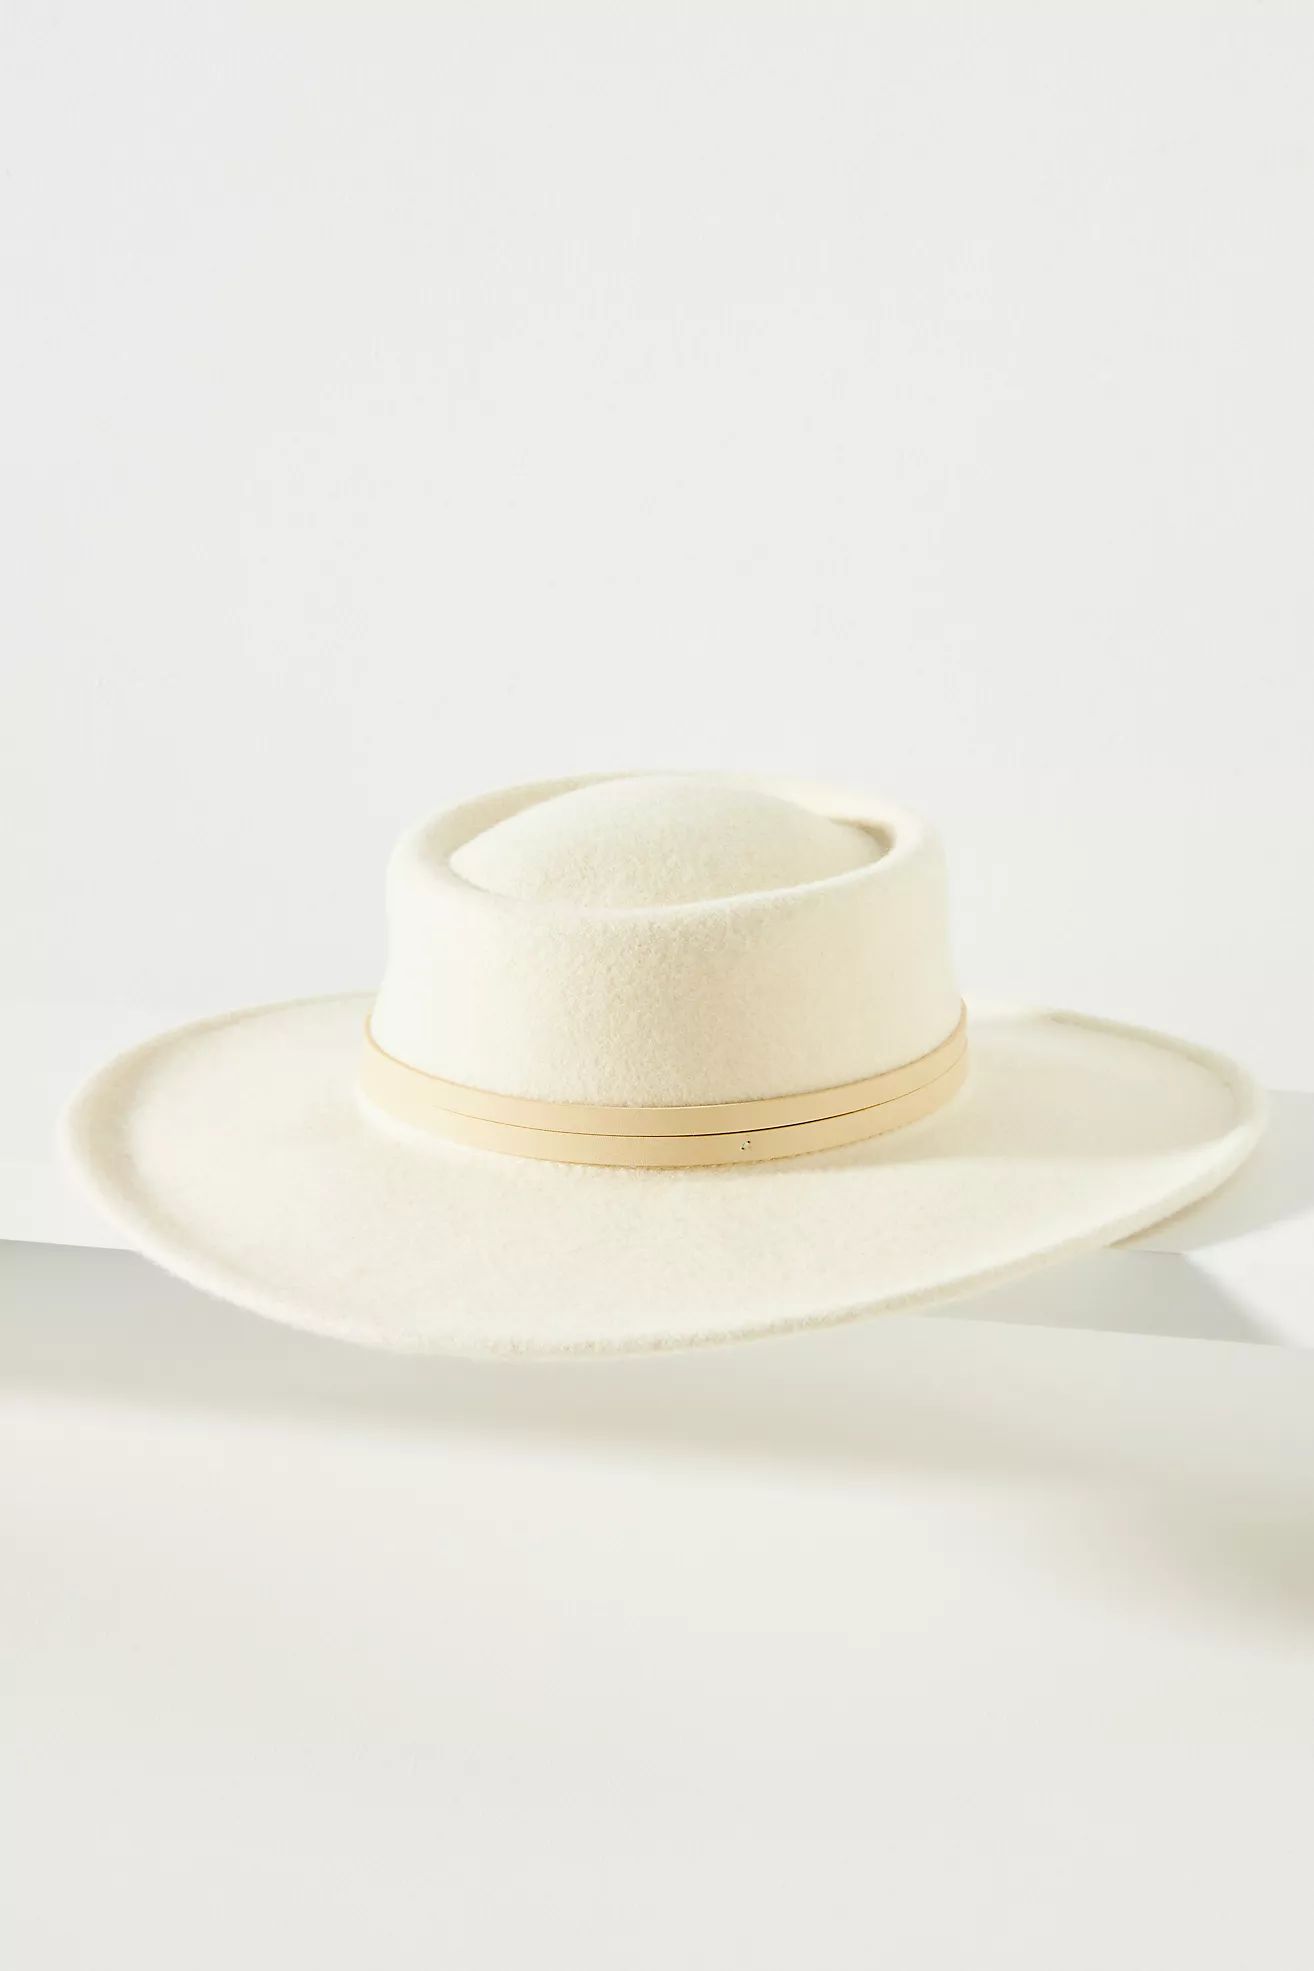 San Diego Hat Co. Double Buckle Boater | Anthropologie (US)